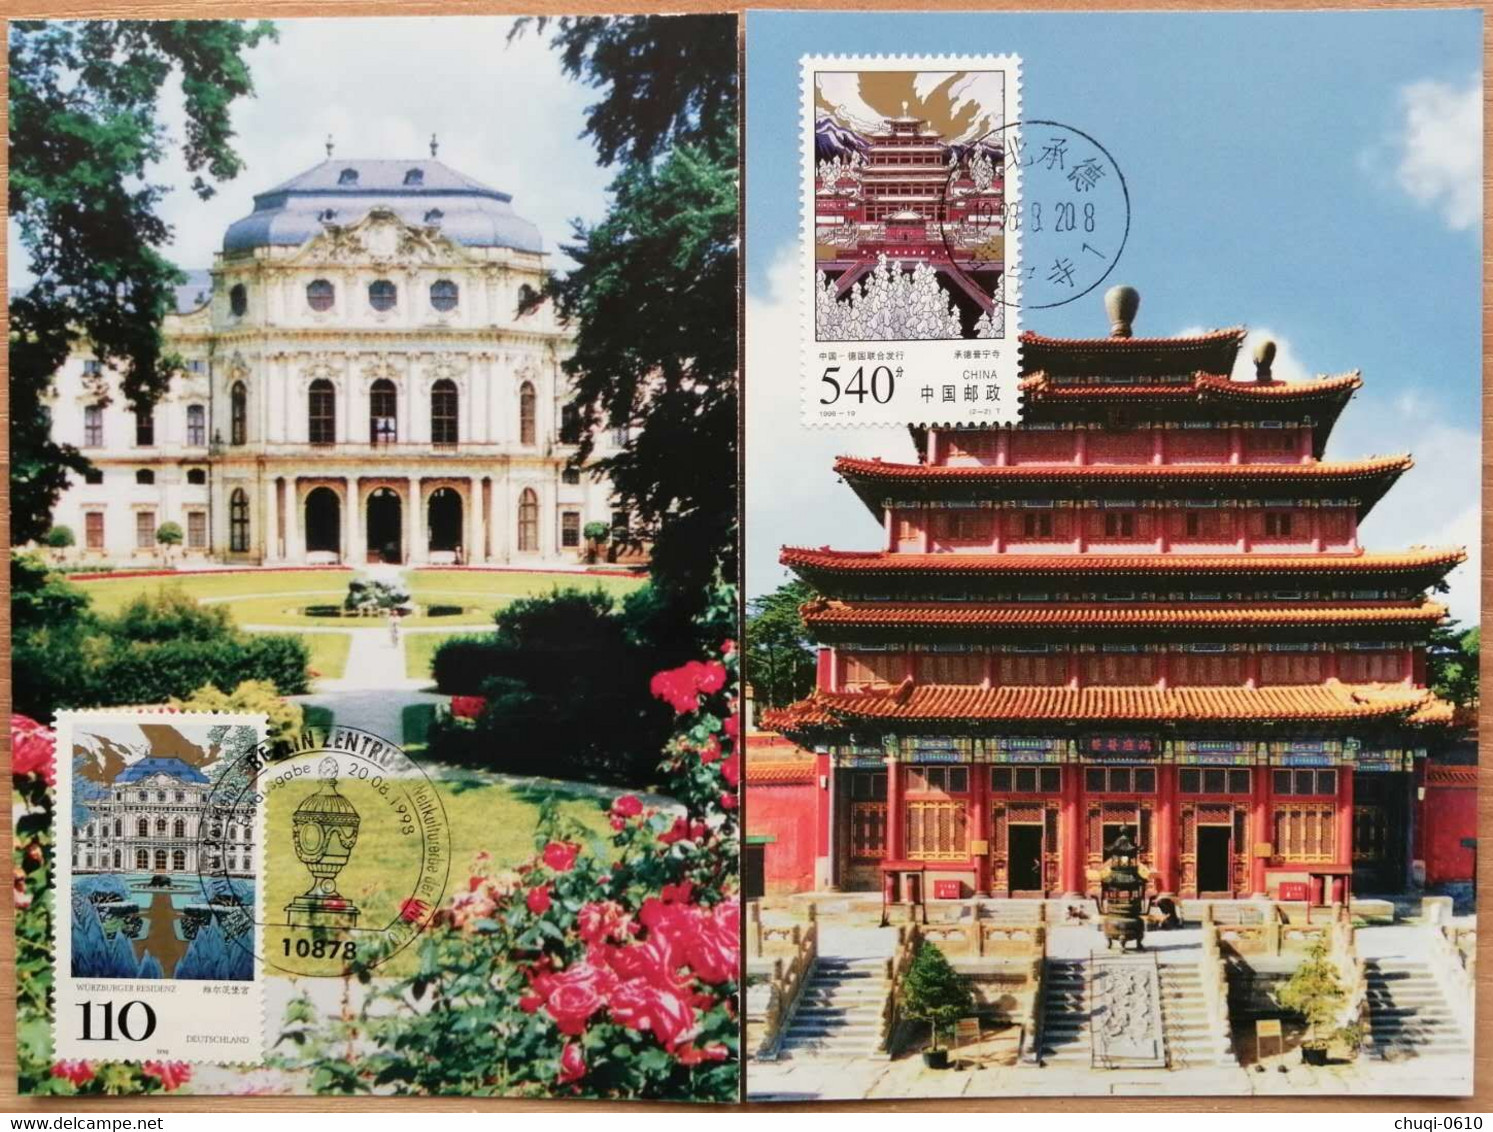 China Maximum Card,1998 Mc-33 Jointly Issued By China And Germany At Puning Temple In Chengde And Vilzburg Palace,2 Pcs - Cartes-maximum